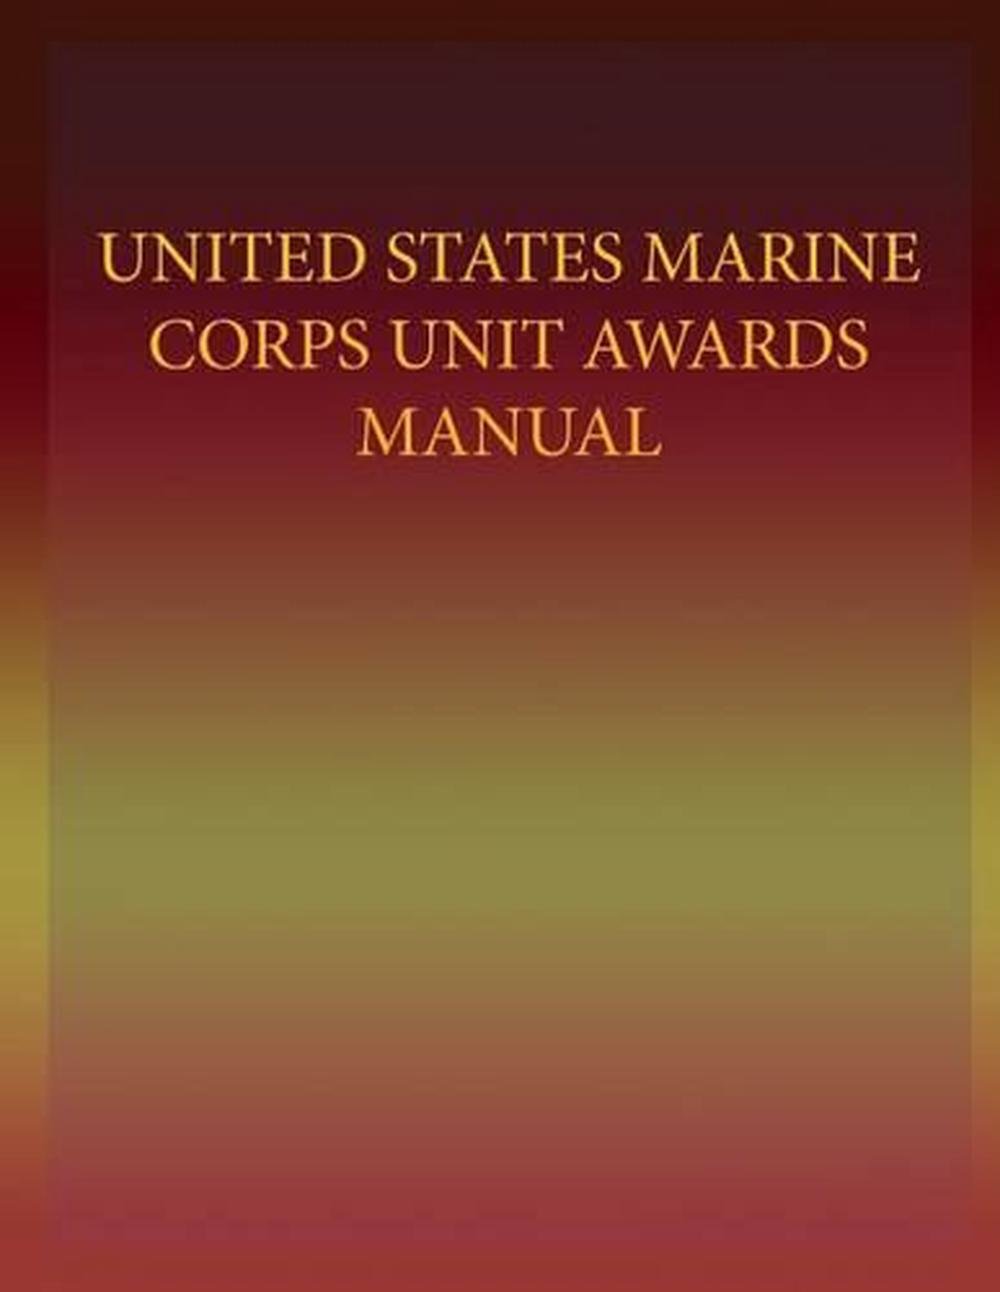 United States Marine Corps Unit Awards Manual by Department of the Navy